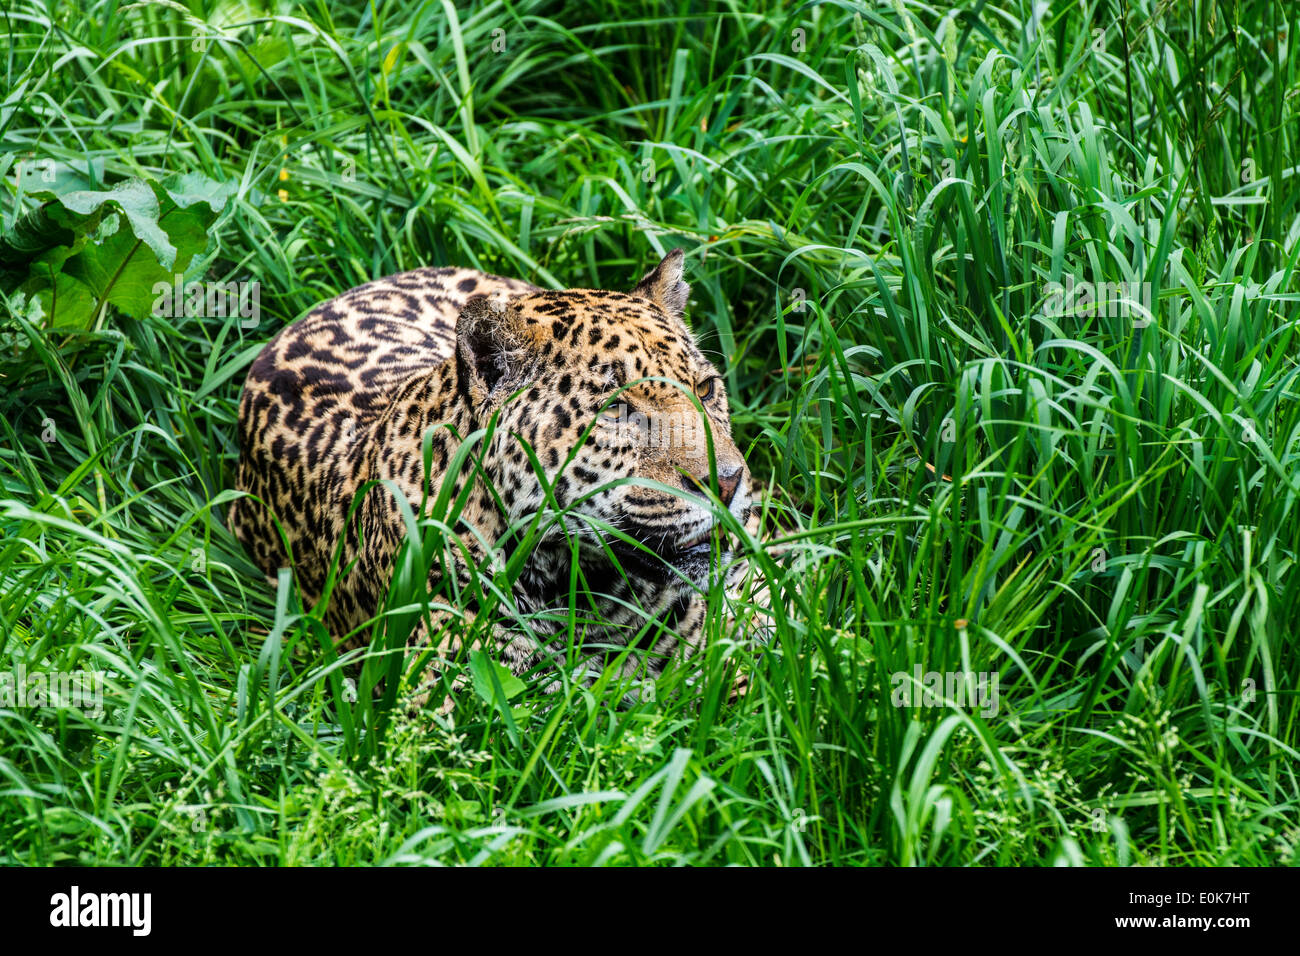 Panther / jaguar (Panthera onca) lying in ambush in the grass, native to Central and South America Stock Photo